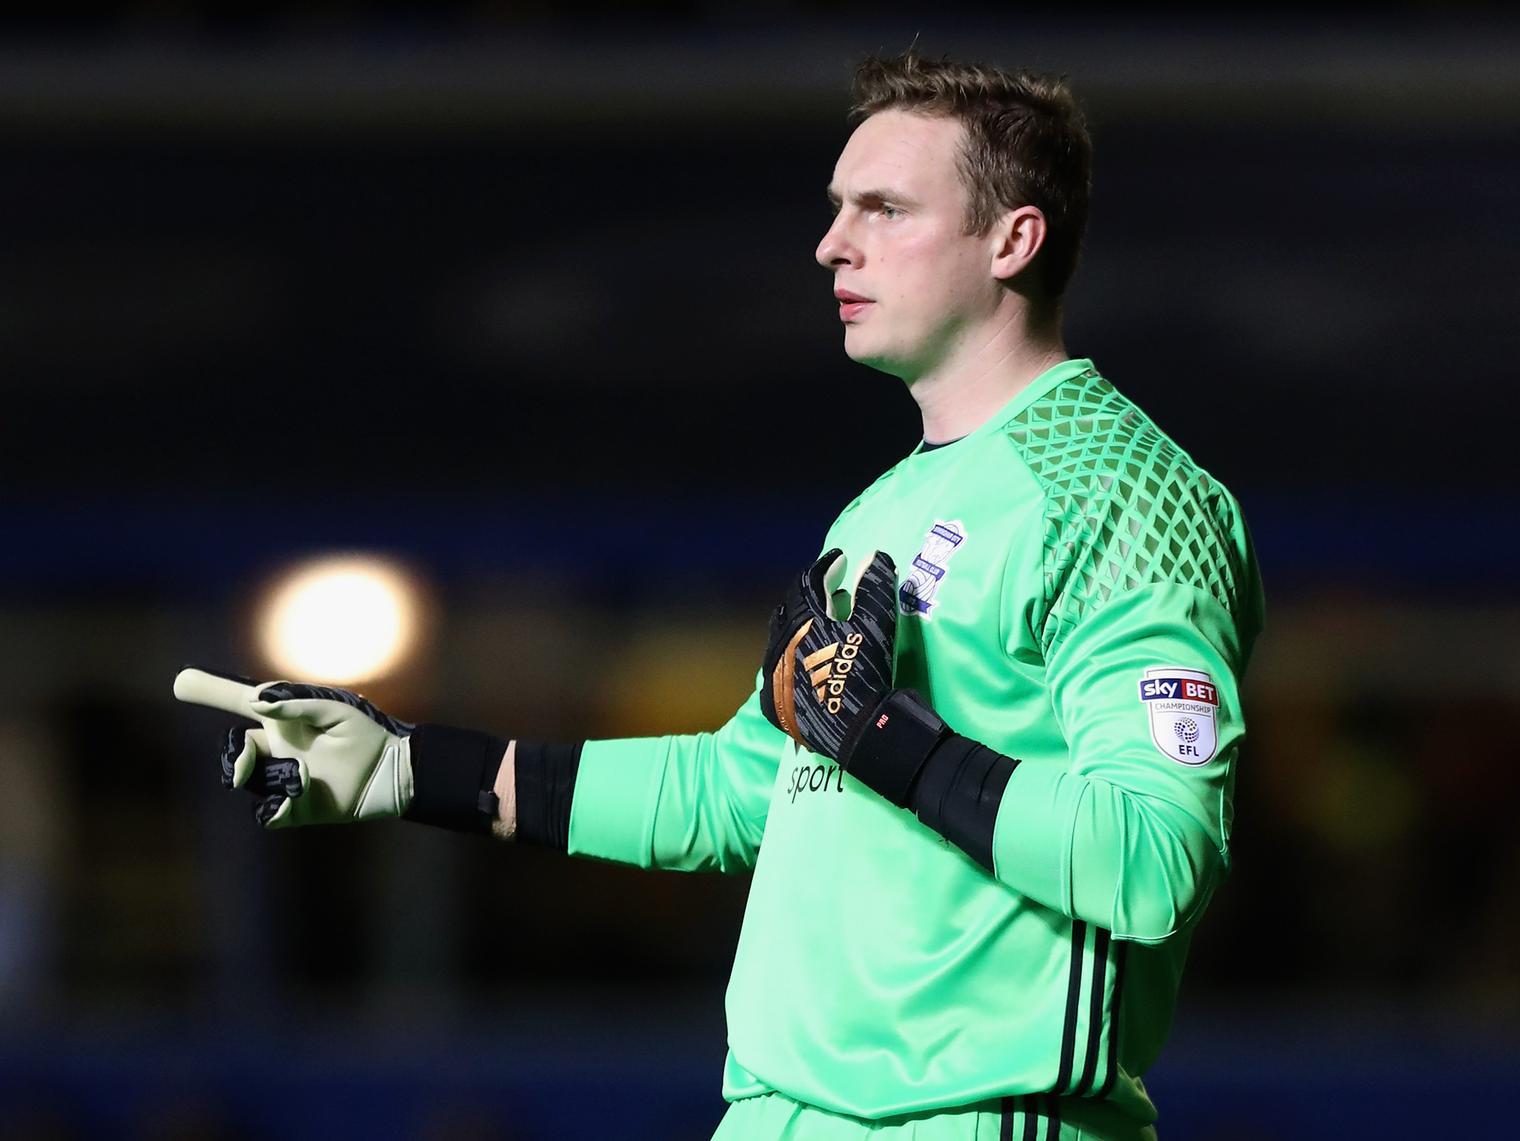 Leeds United have been linked with a move for Birmingham City goalkeeper David Stockdale, as they step up their efforts to find suitable cover for Kiko Casilla. (Football League World)